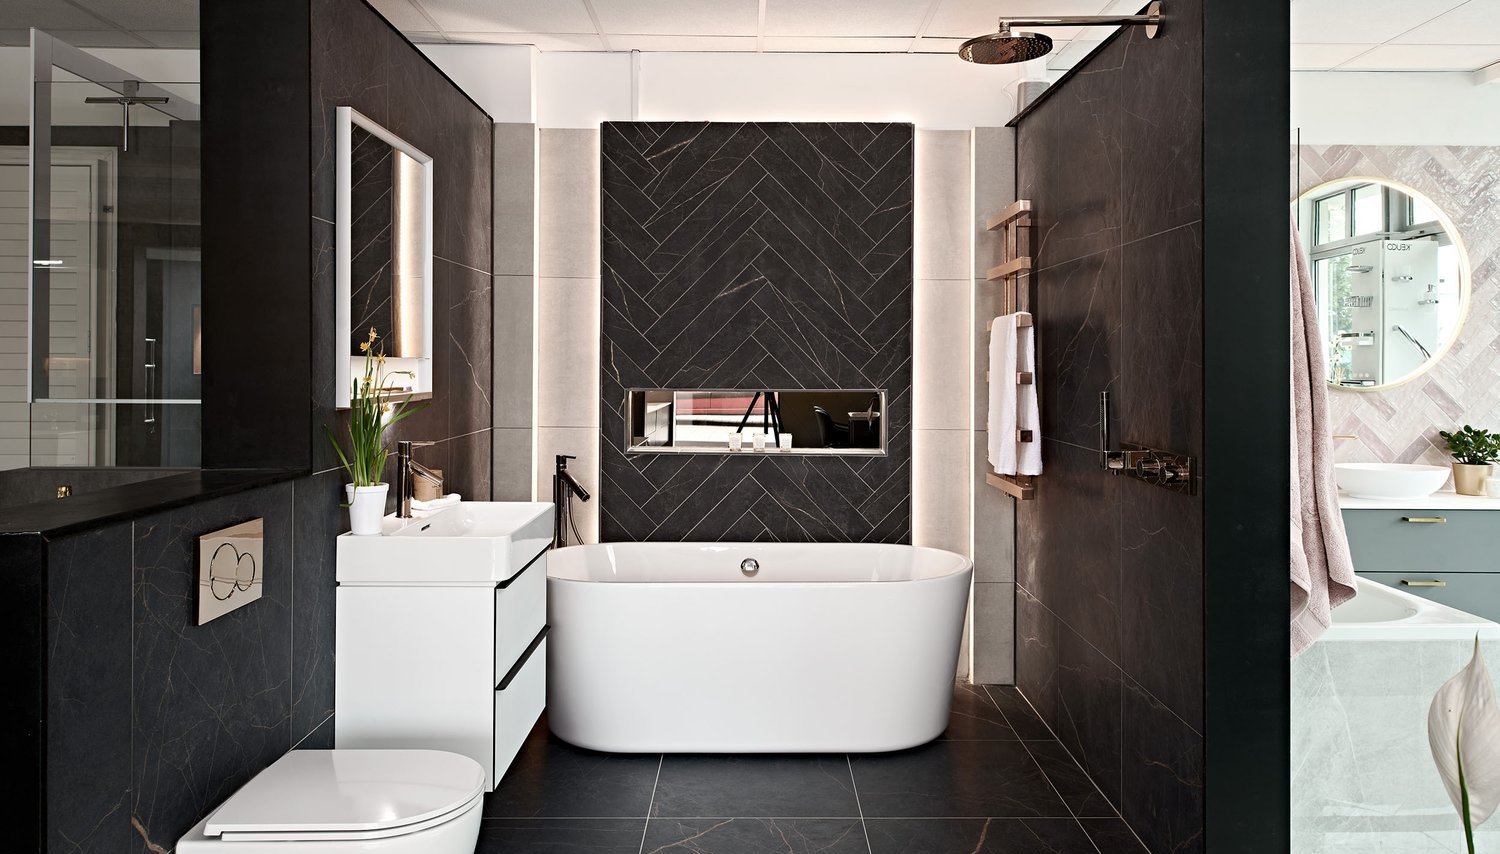 A bathroom design sample from Ripples Chelmsford Showroom